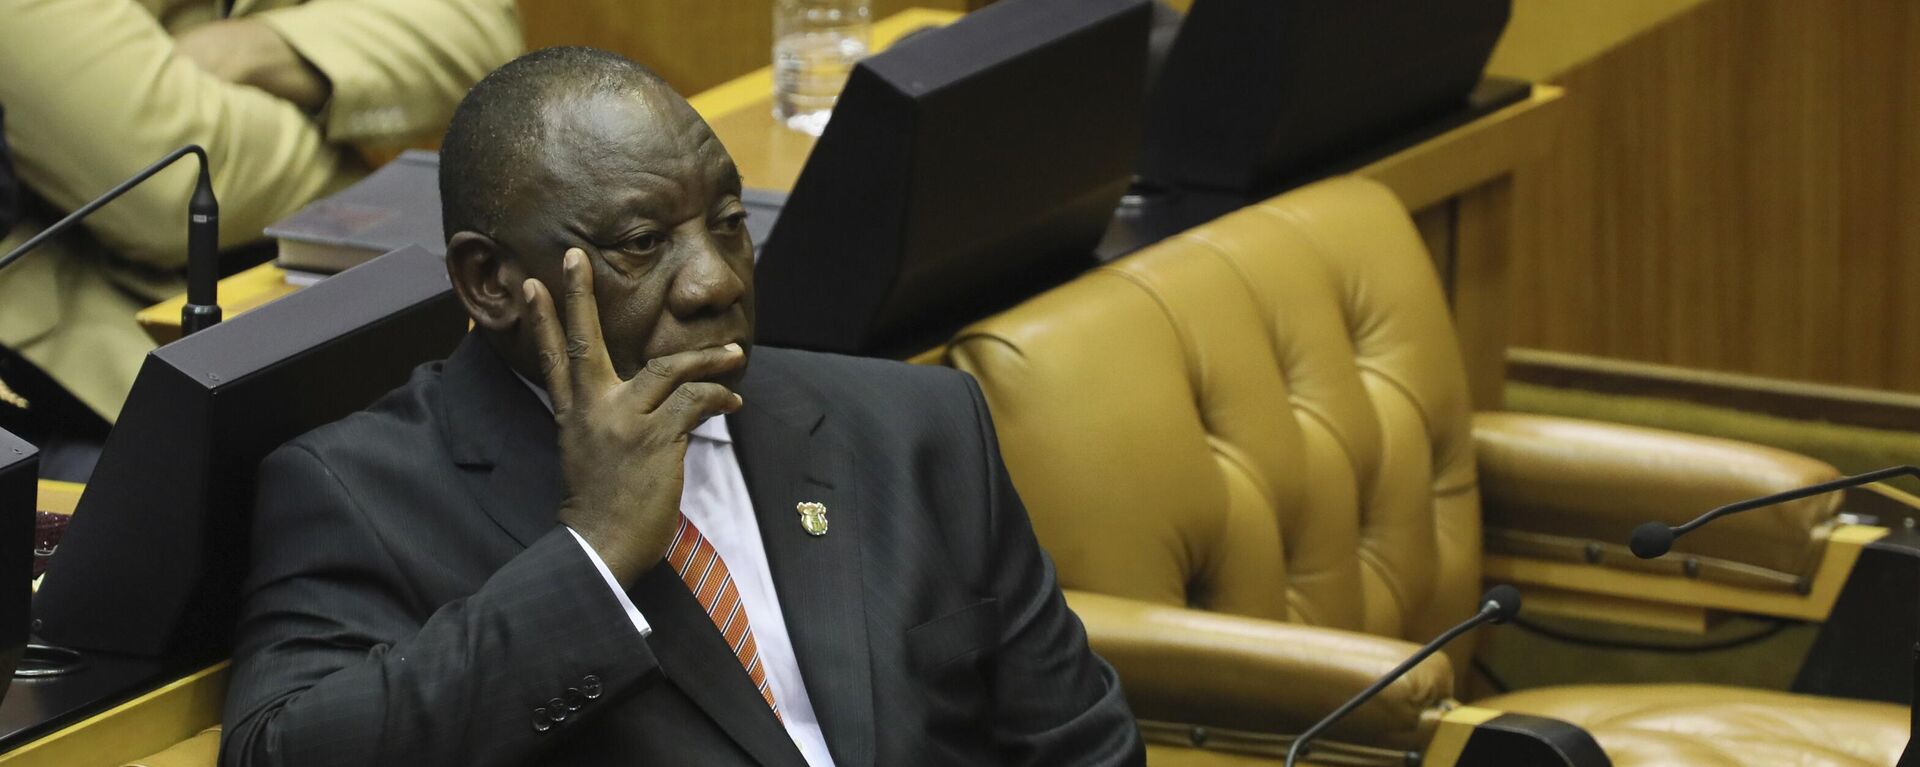 South African President Cyril Ramaphosa waits as members of the Economic Freedom Fighters (EFF) party disrupt parliament proceedings at the State of the Nation Address in Cape Town, South Africa, Thursday, Feb. 13, 2020. - Sputnik International, 1920, 07.06.2022